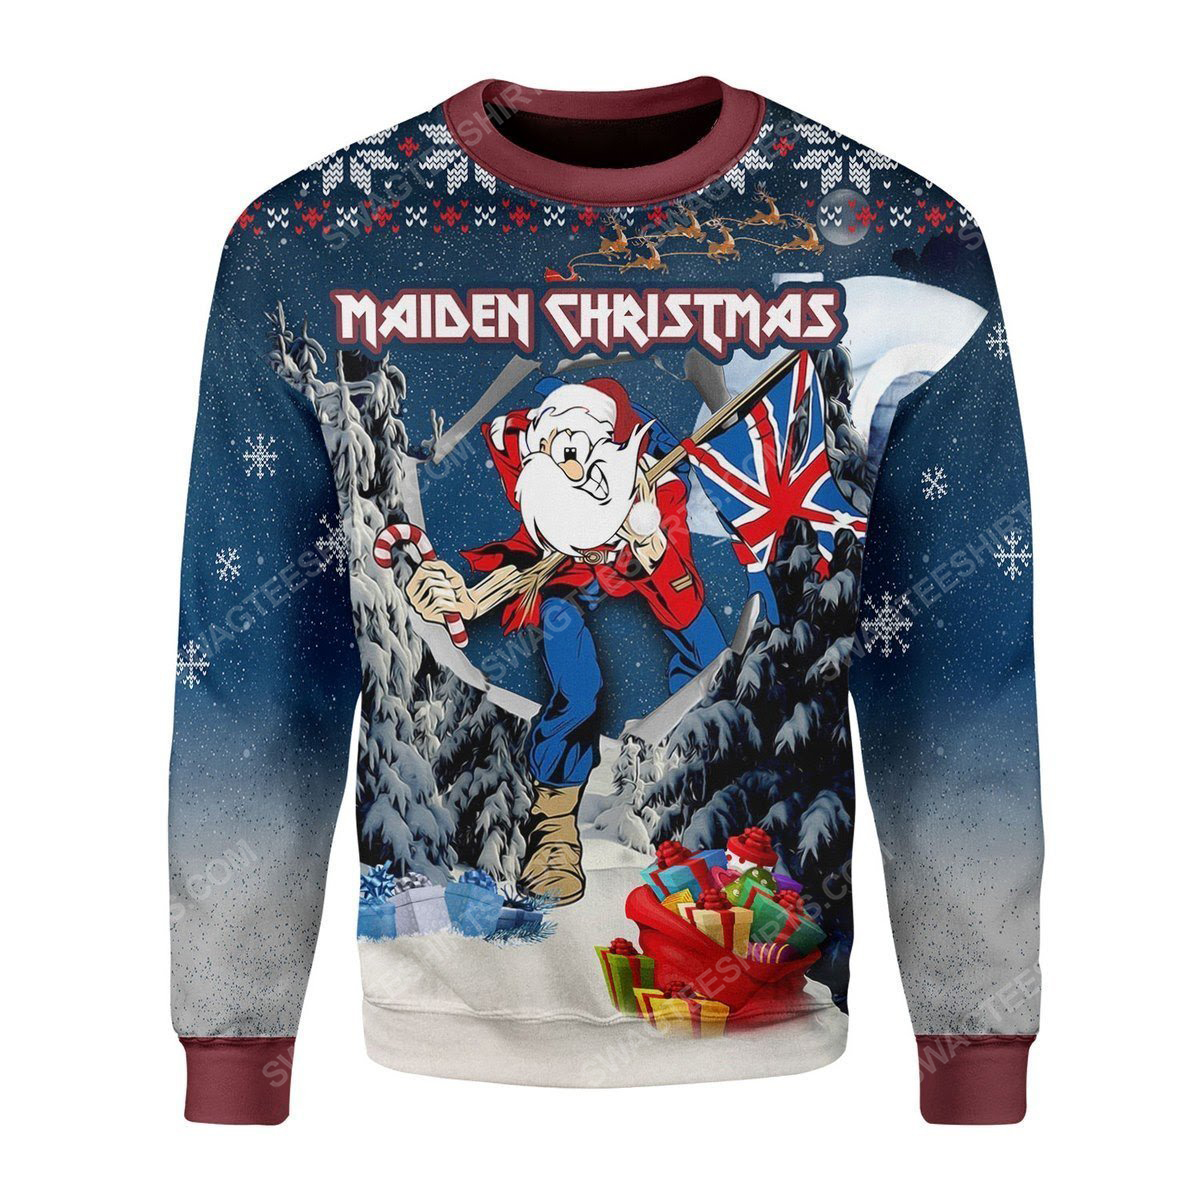 [special edition] Maiden christmas santa iron maiden ugly christmas sweater – maria